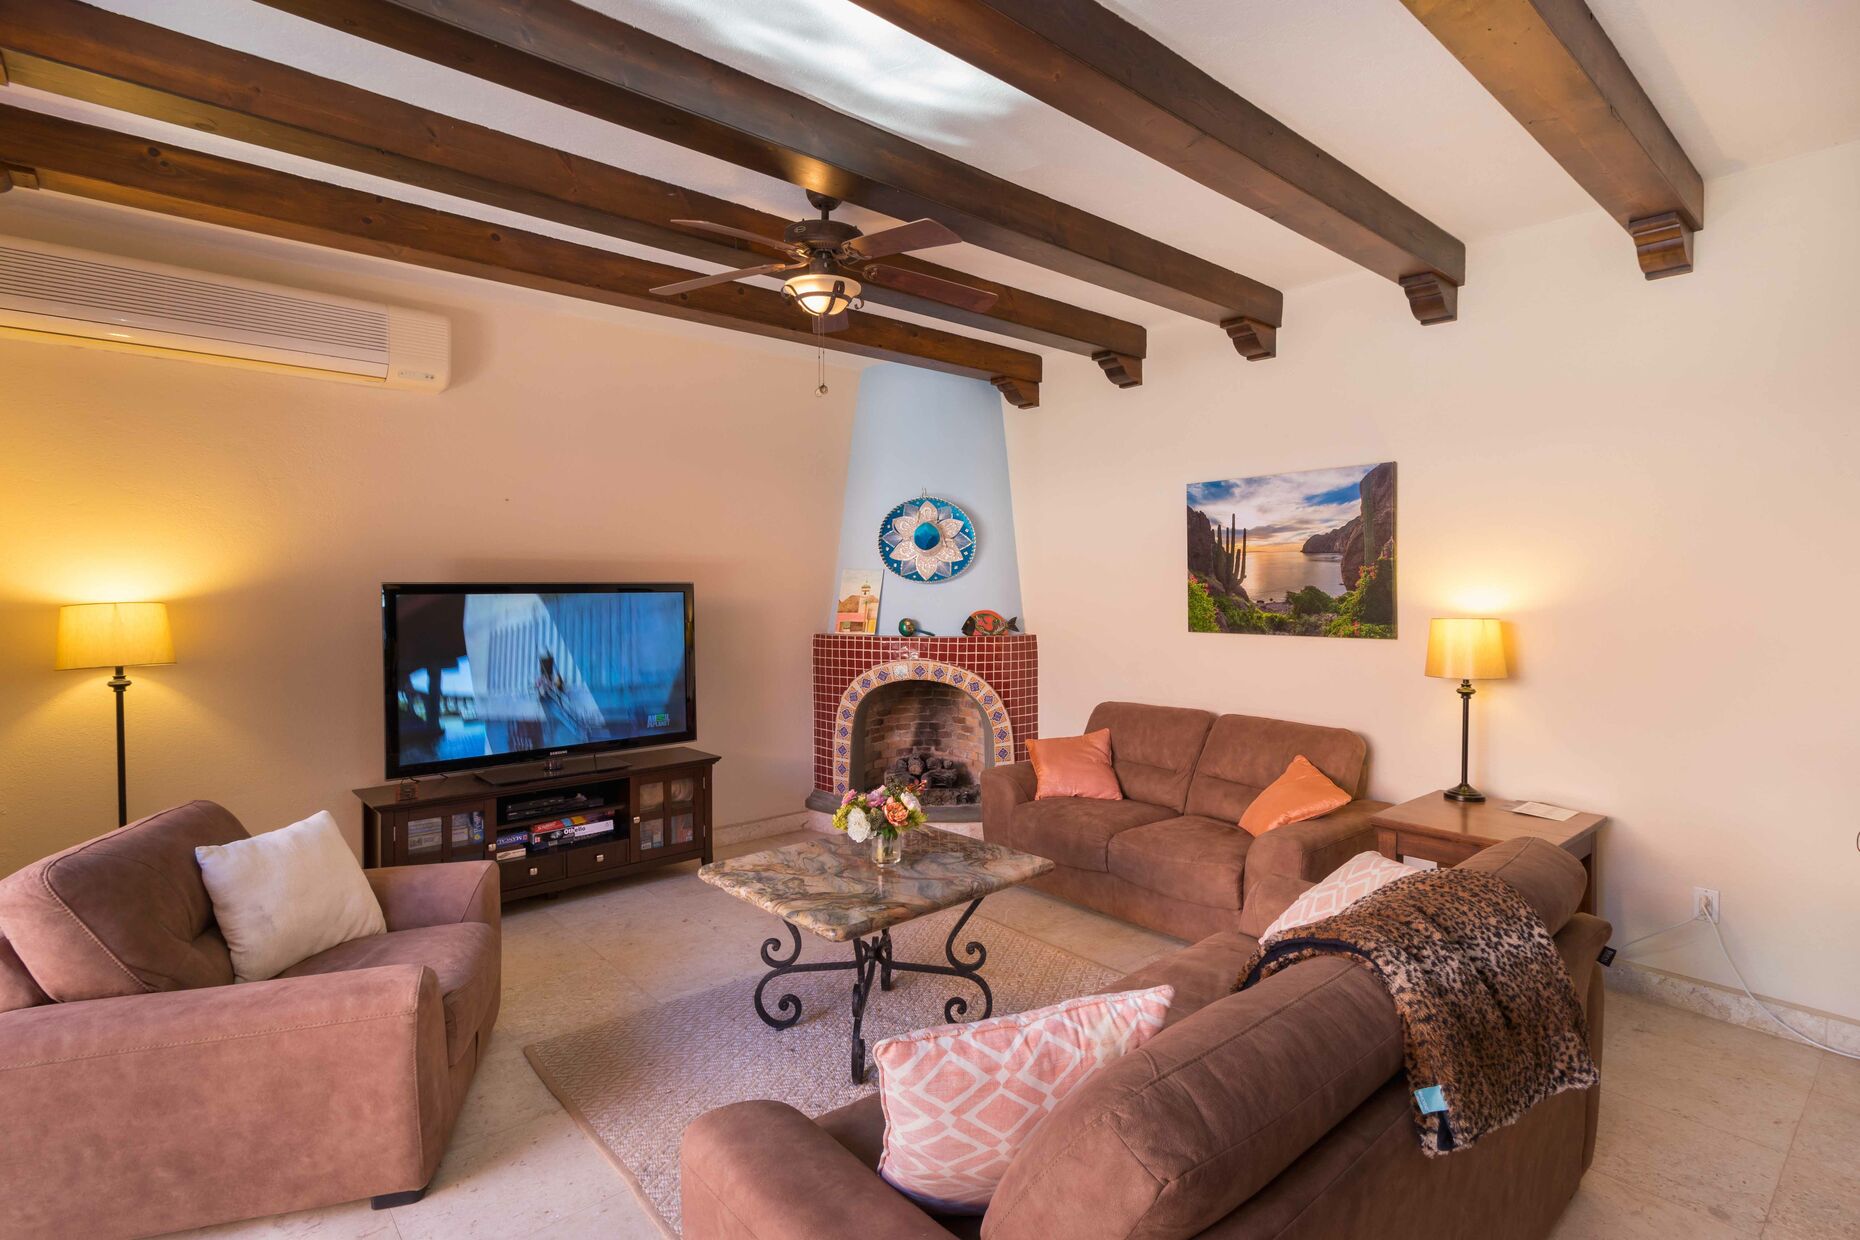 Living Room / AC / Ceiling Fan / Wi - Fi / TV with Satellite TV service English Programming